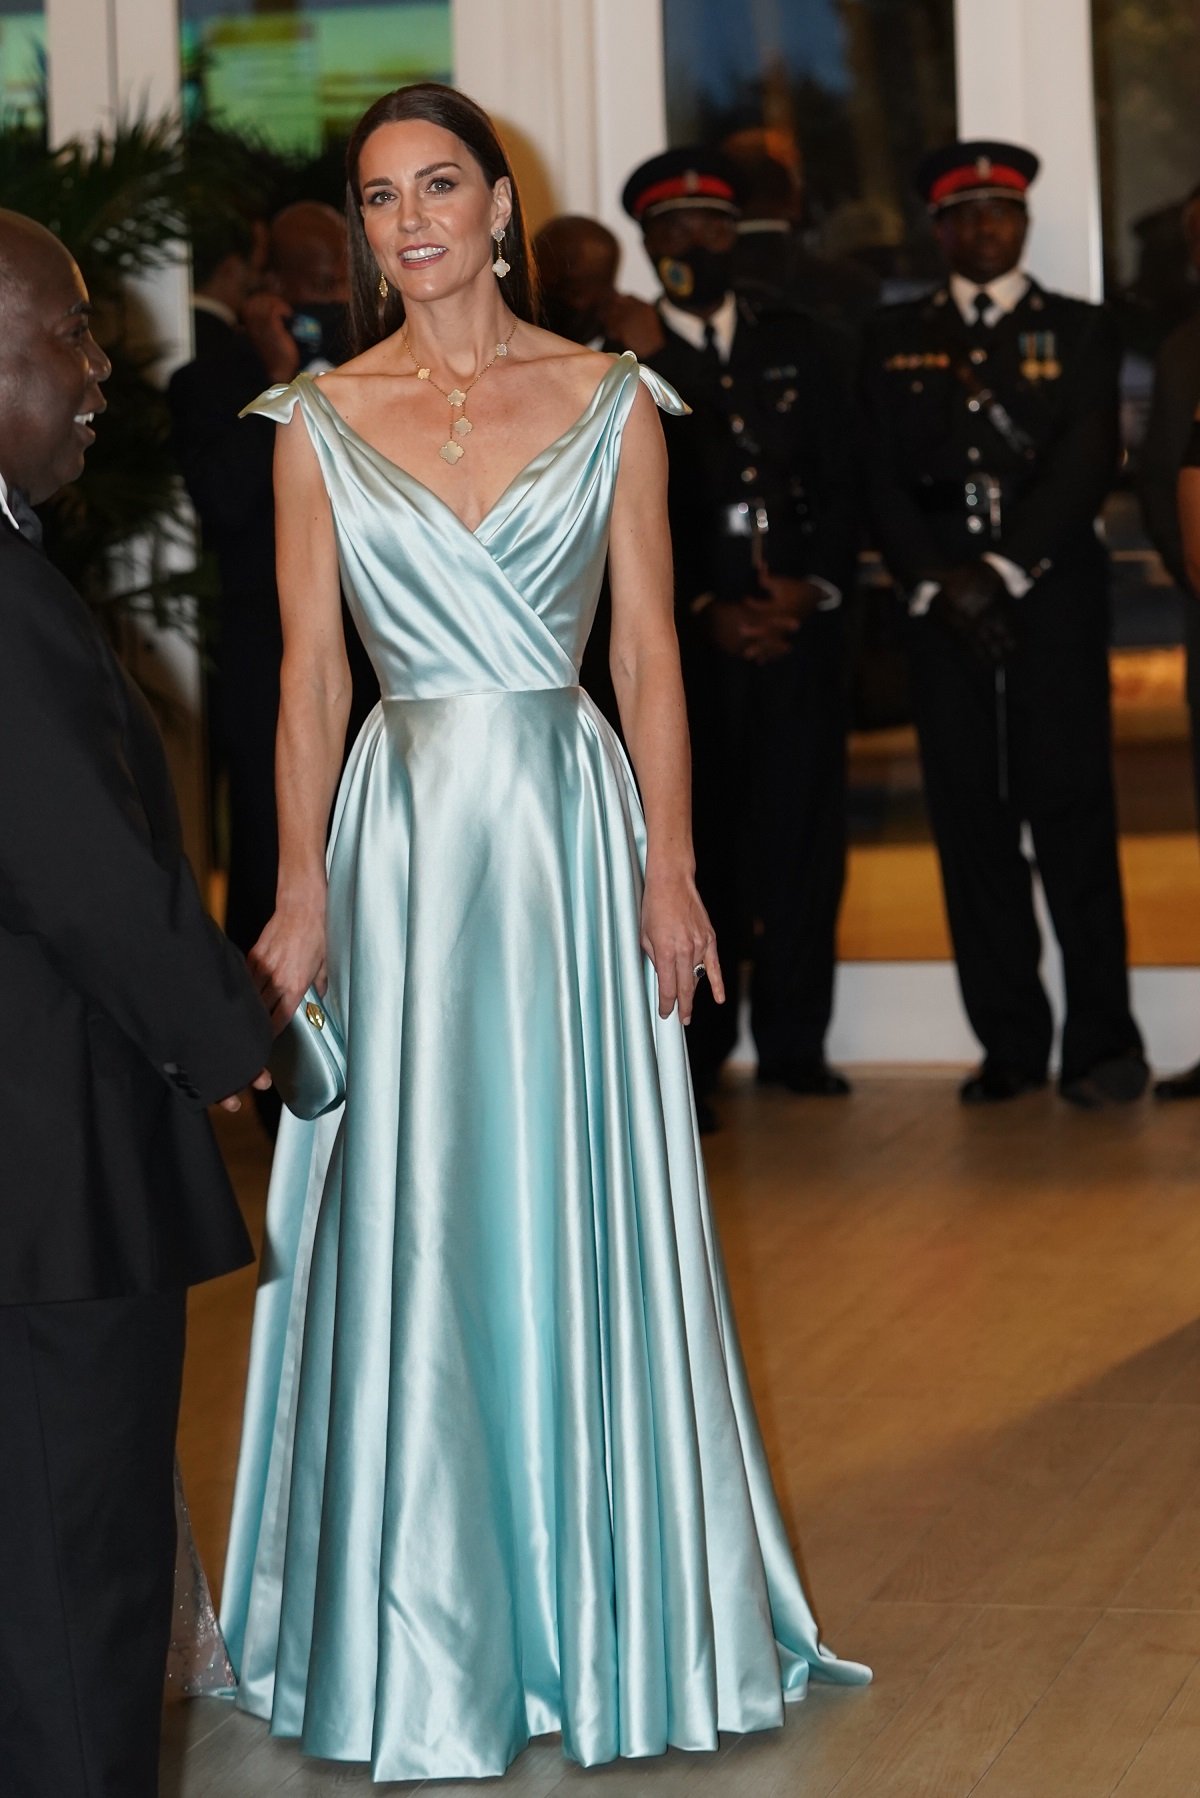 Kate Middleton attends a reception hosted by the Governor General at Baha Mar Resort in the Bahamas